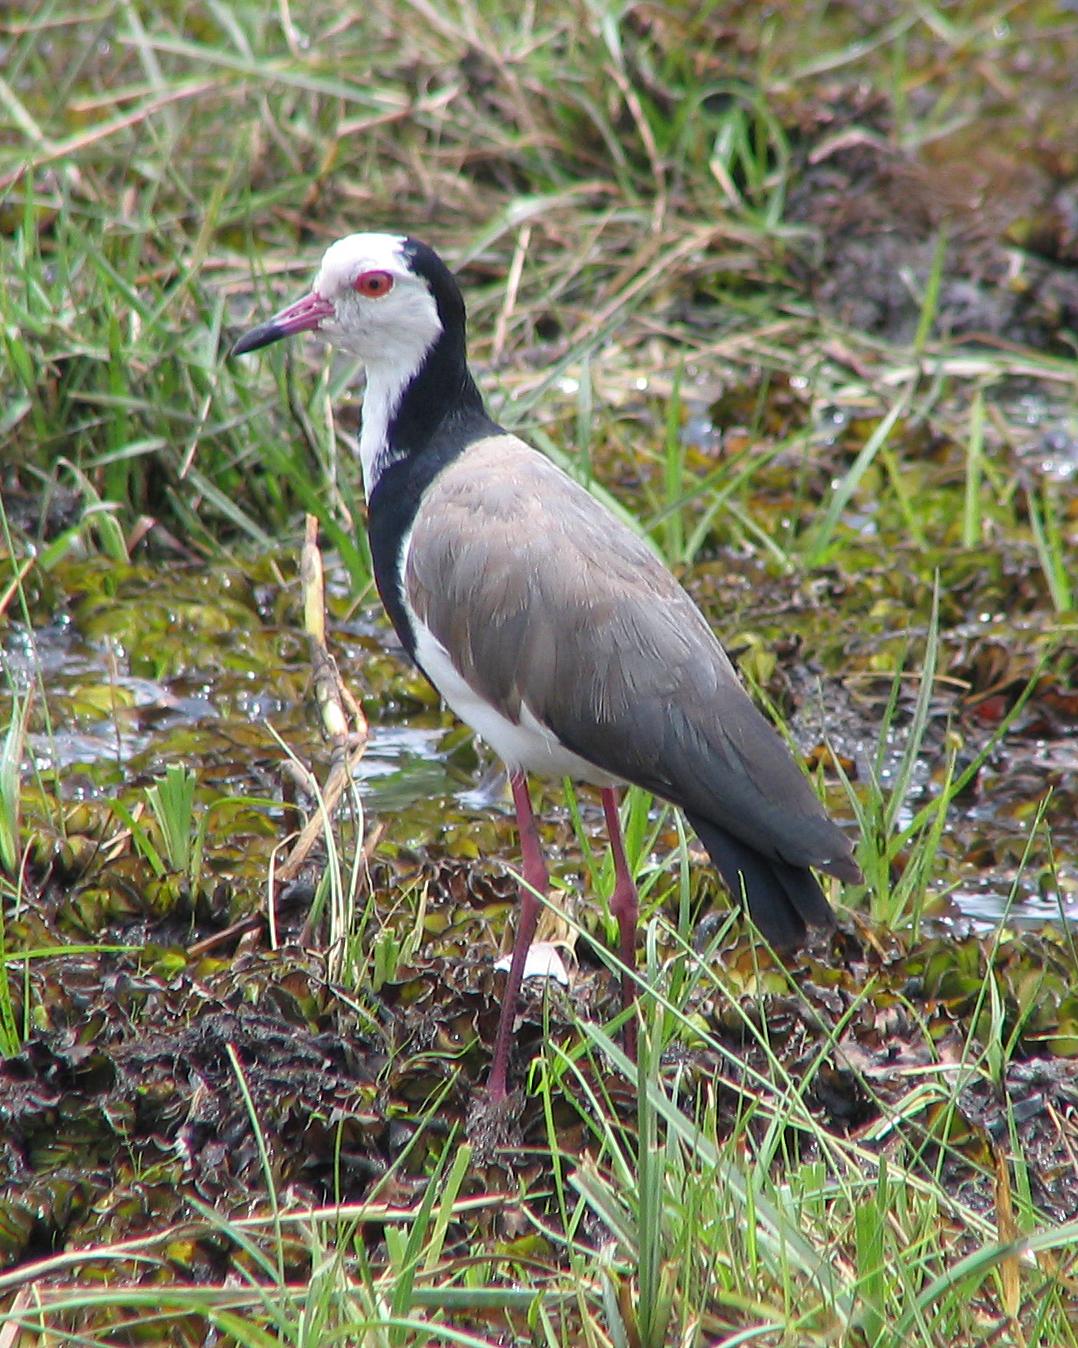 Long-toed Lapwing Photo by Henk Baptist